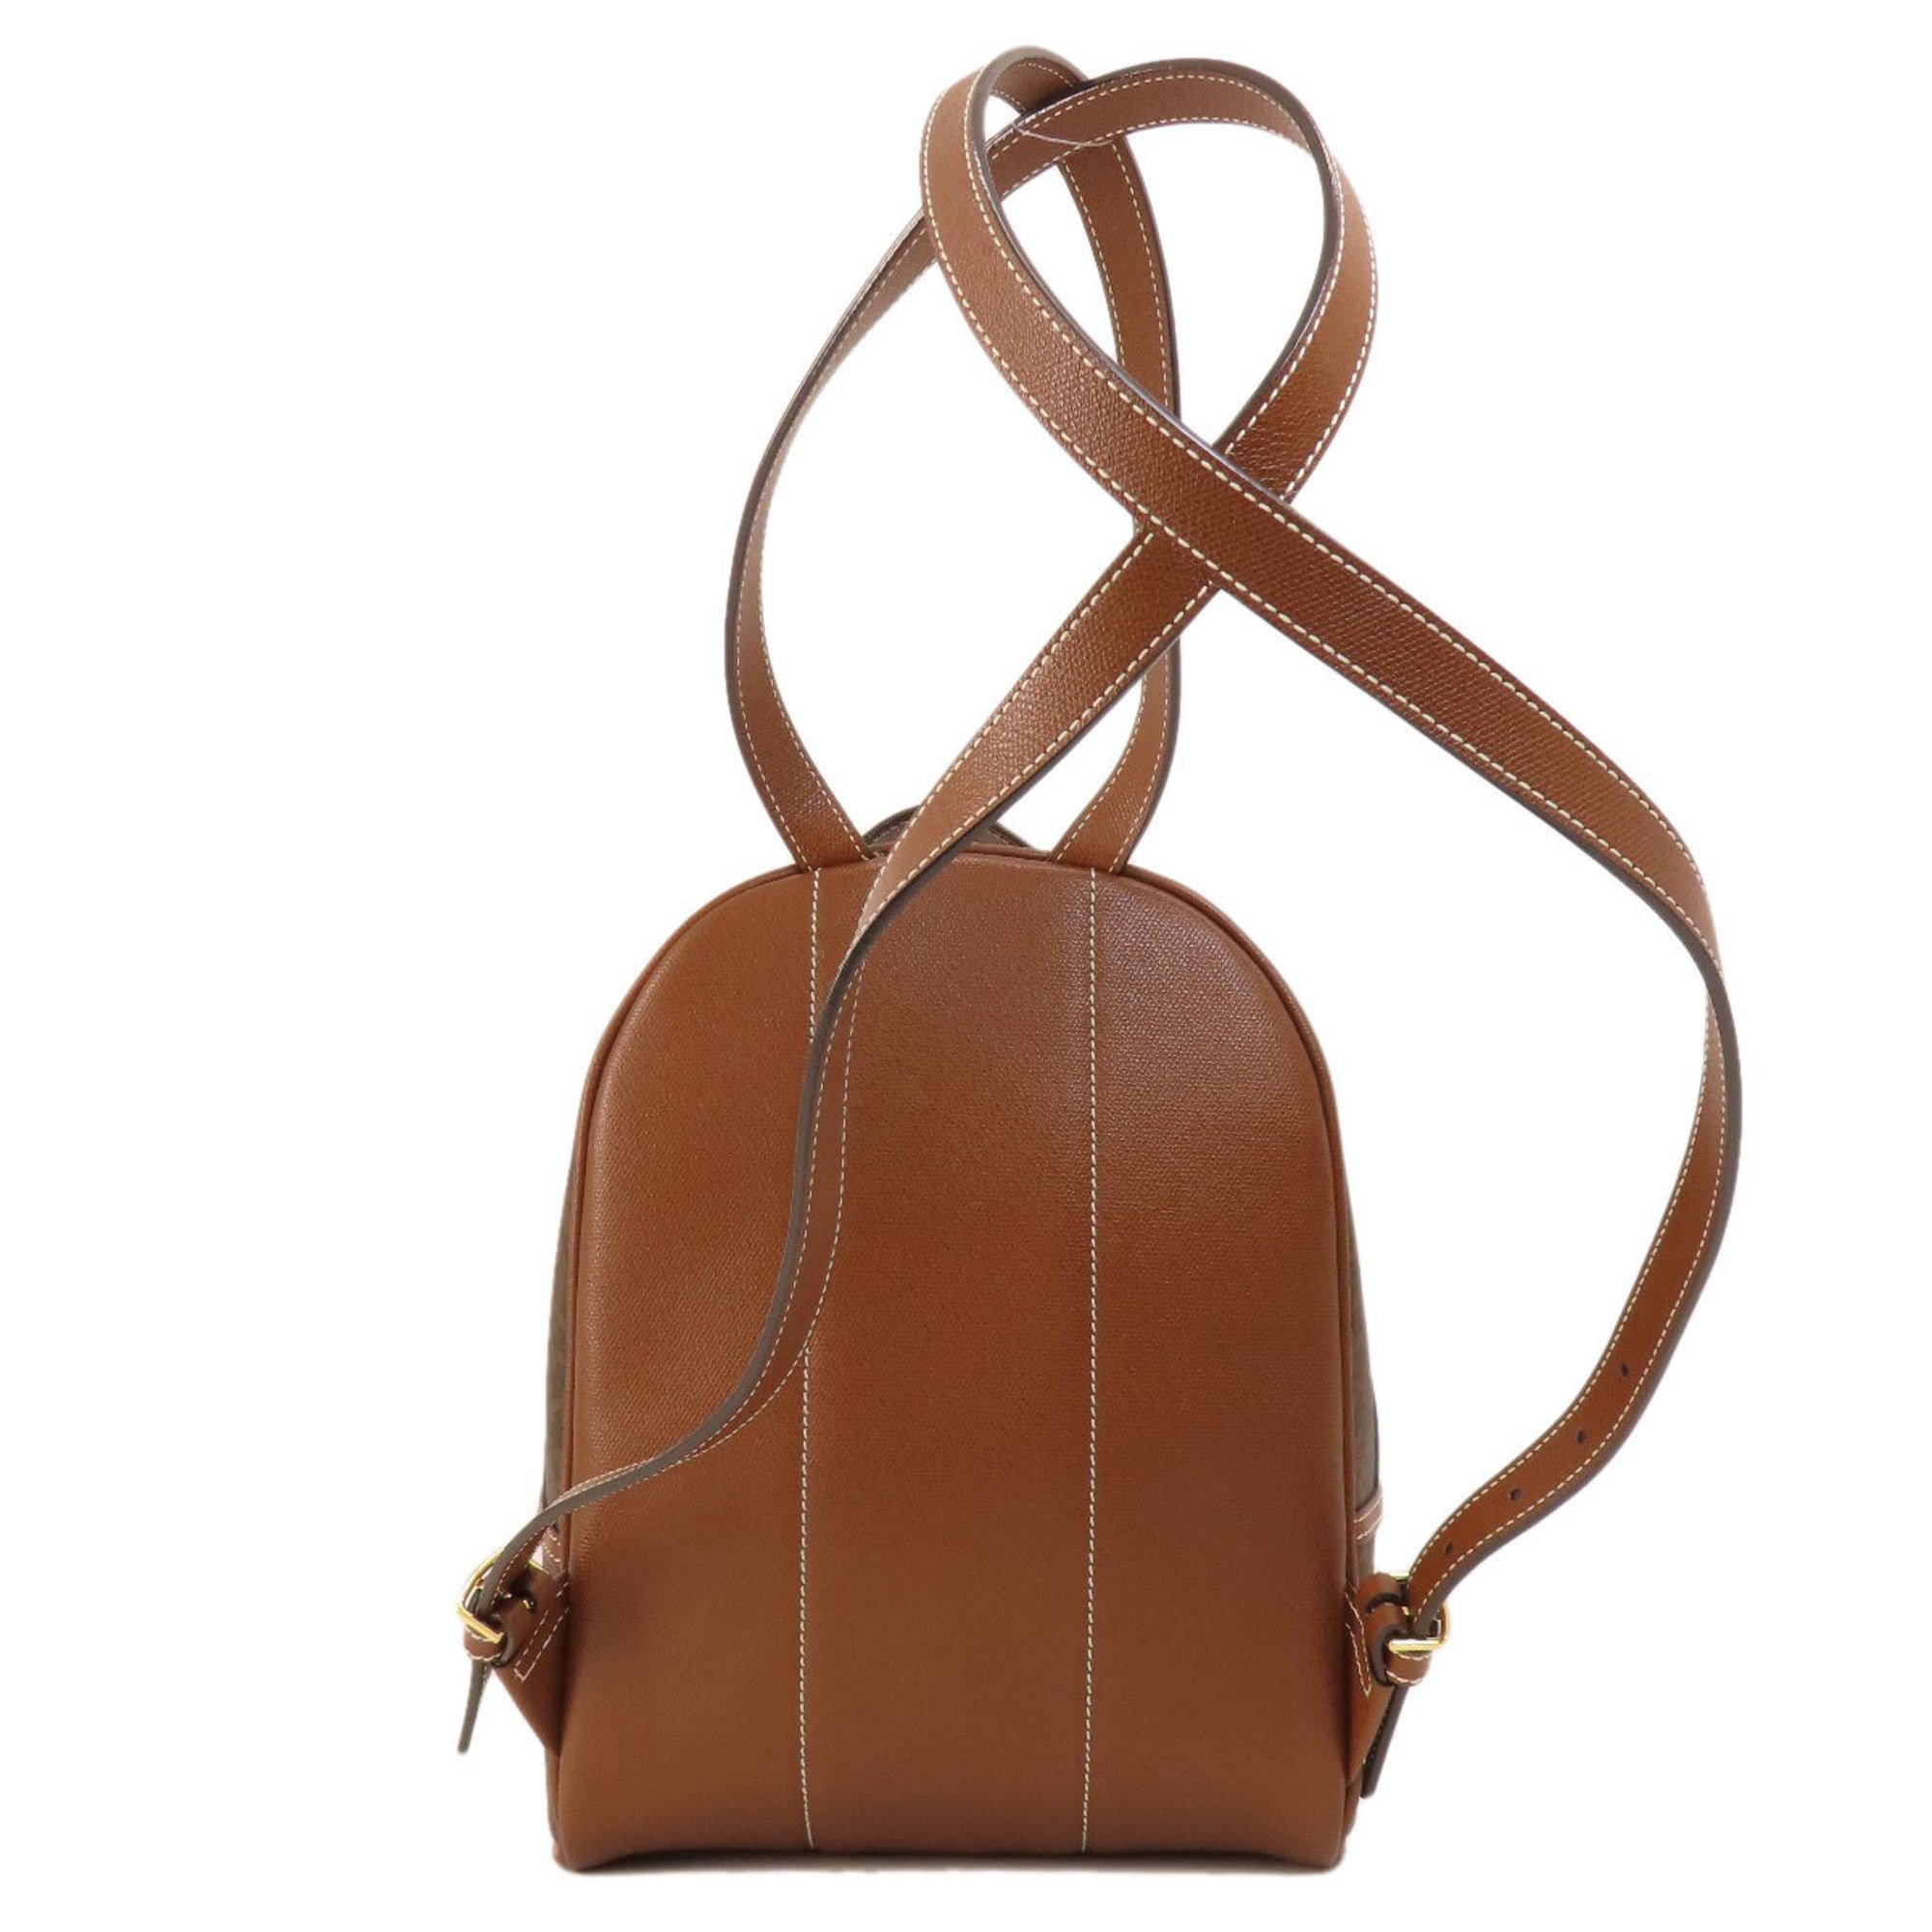 BALLY Backpack/Daypack PVC/Leather Women's